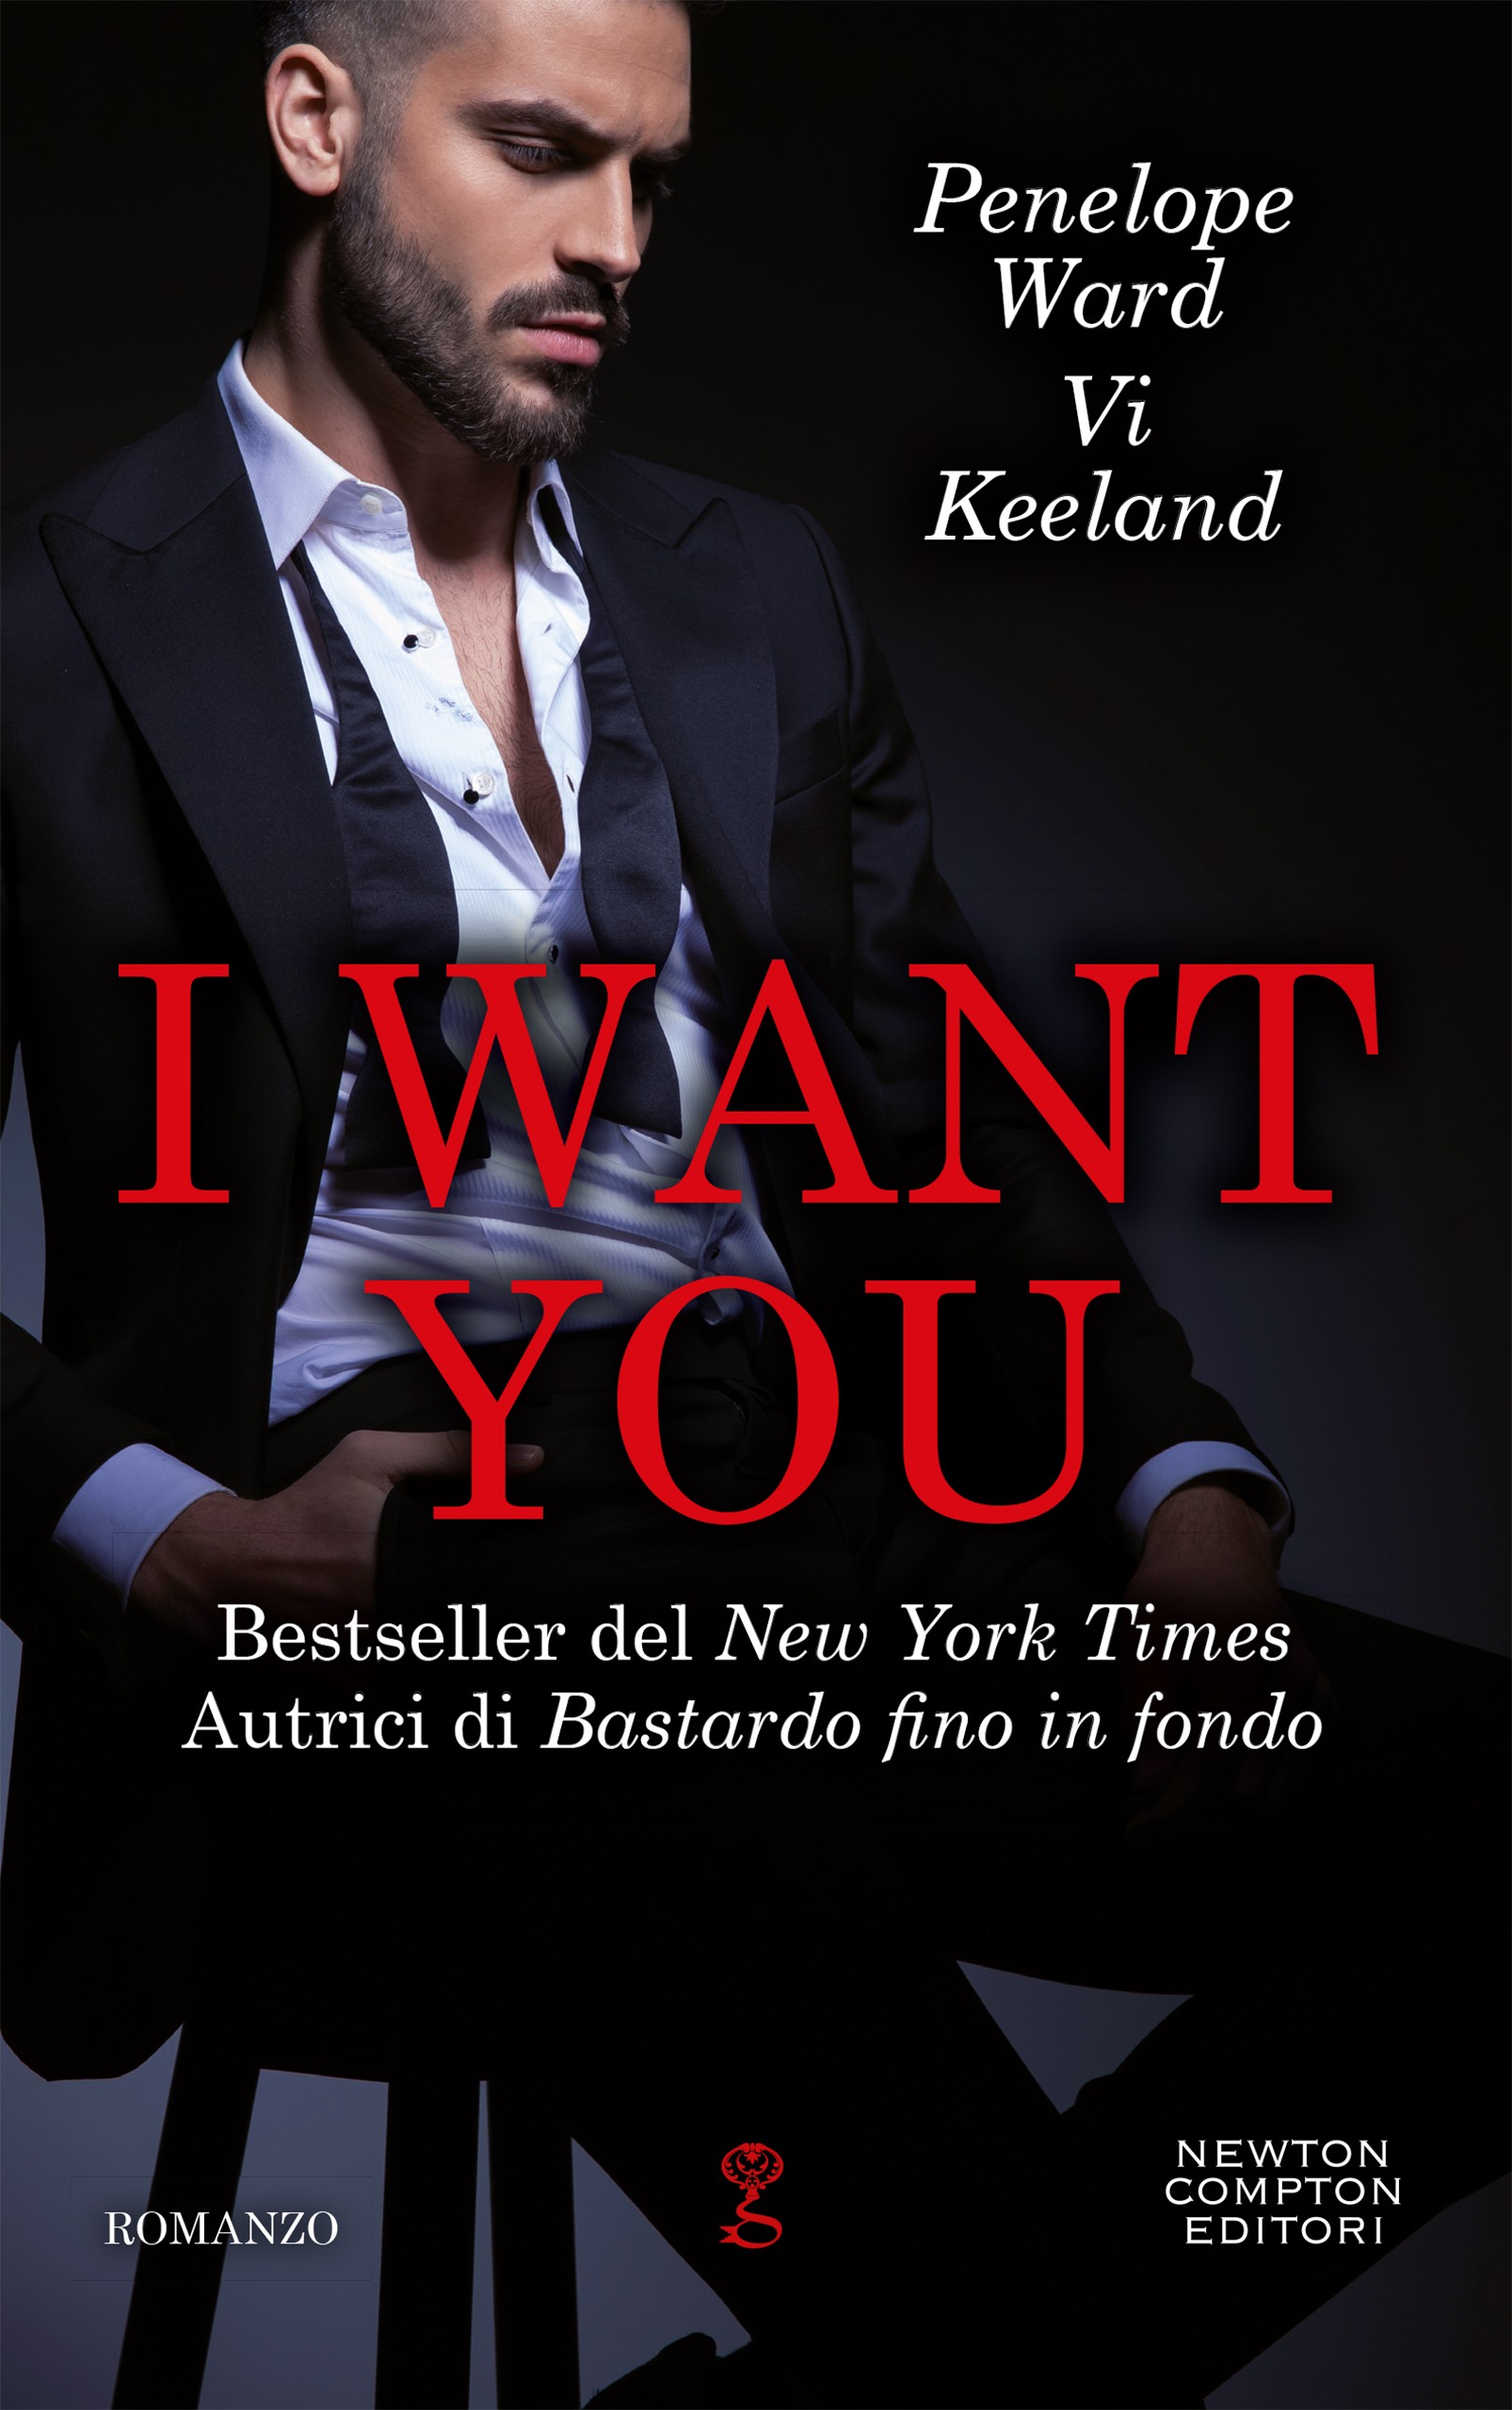 I want you - Librerie.coop